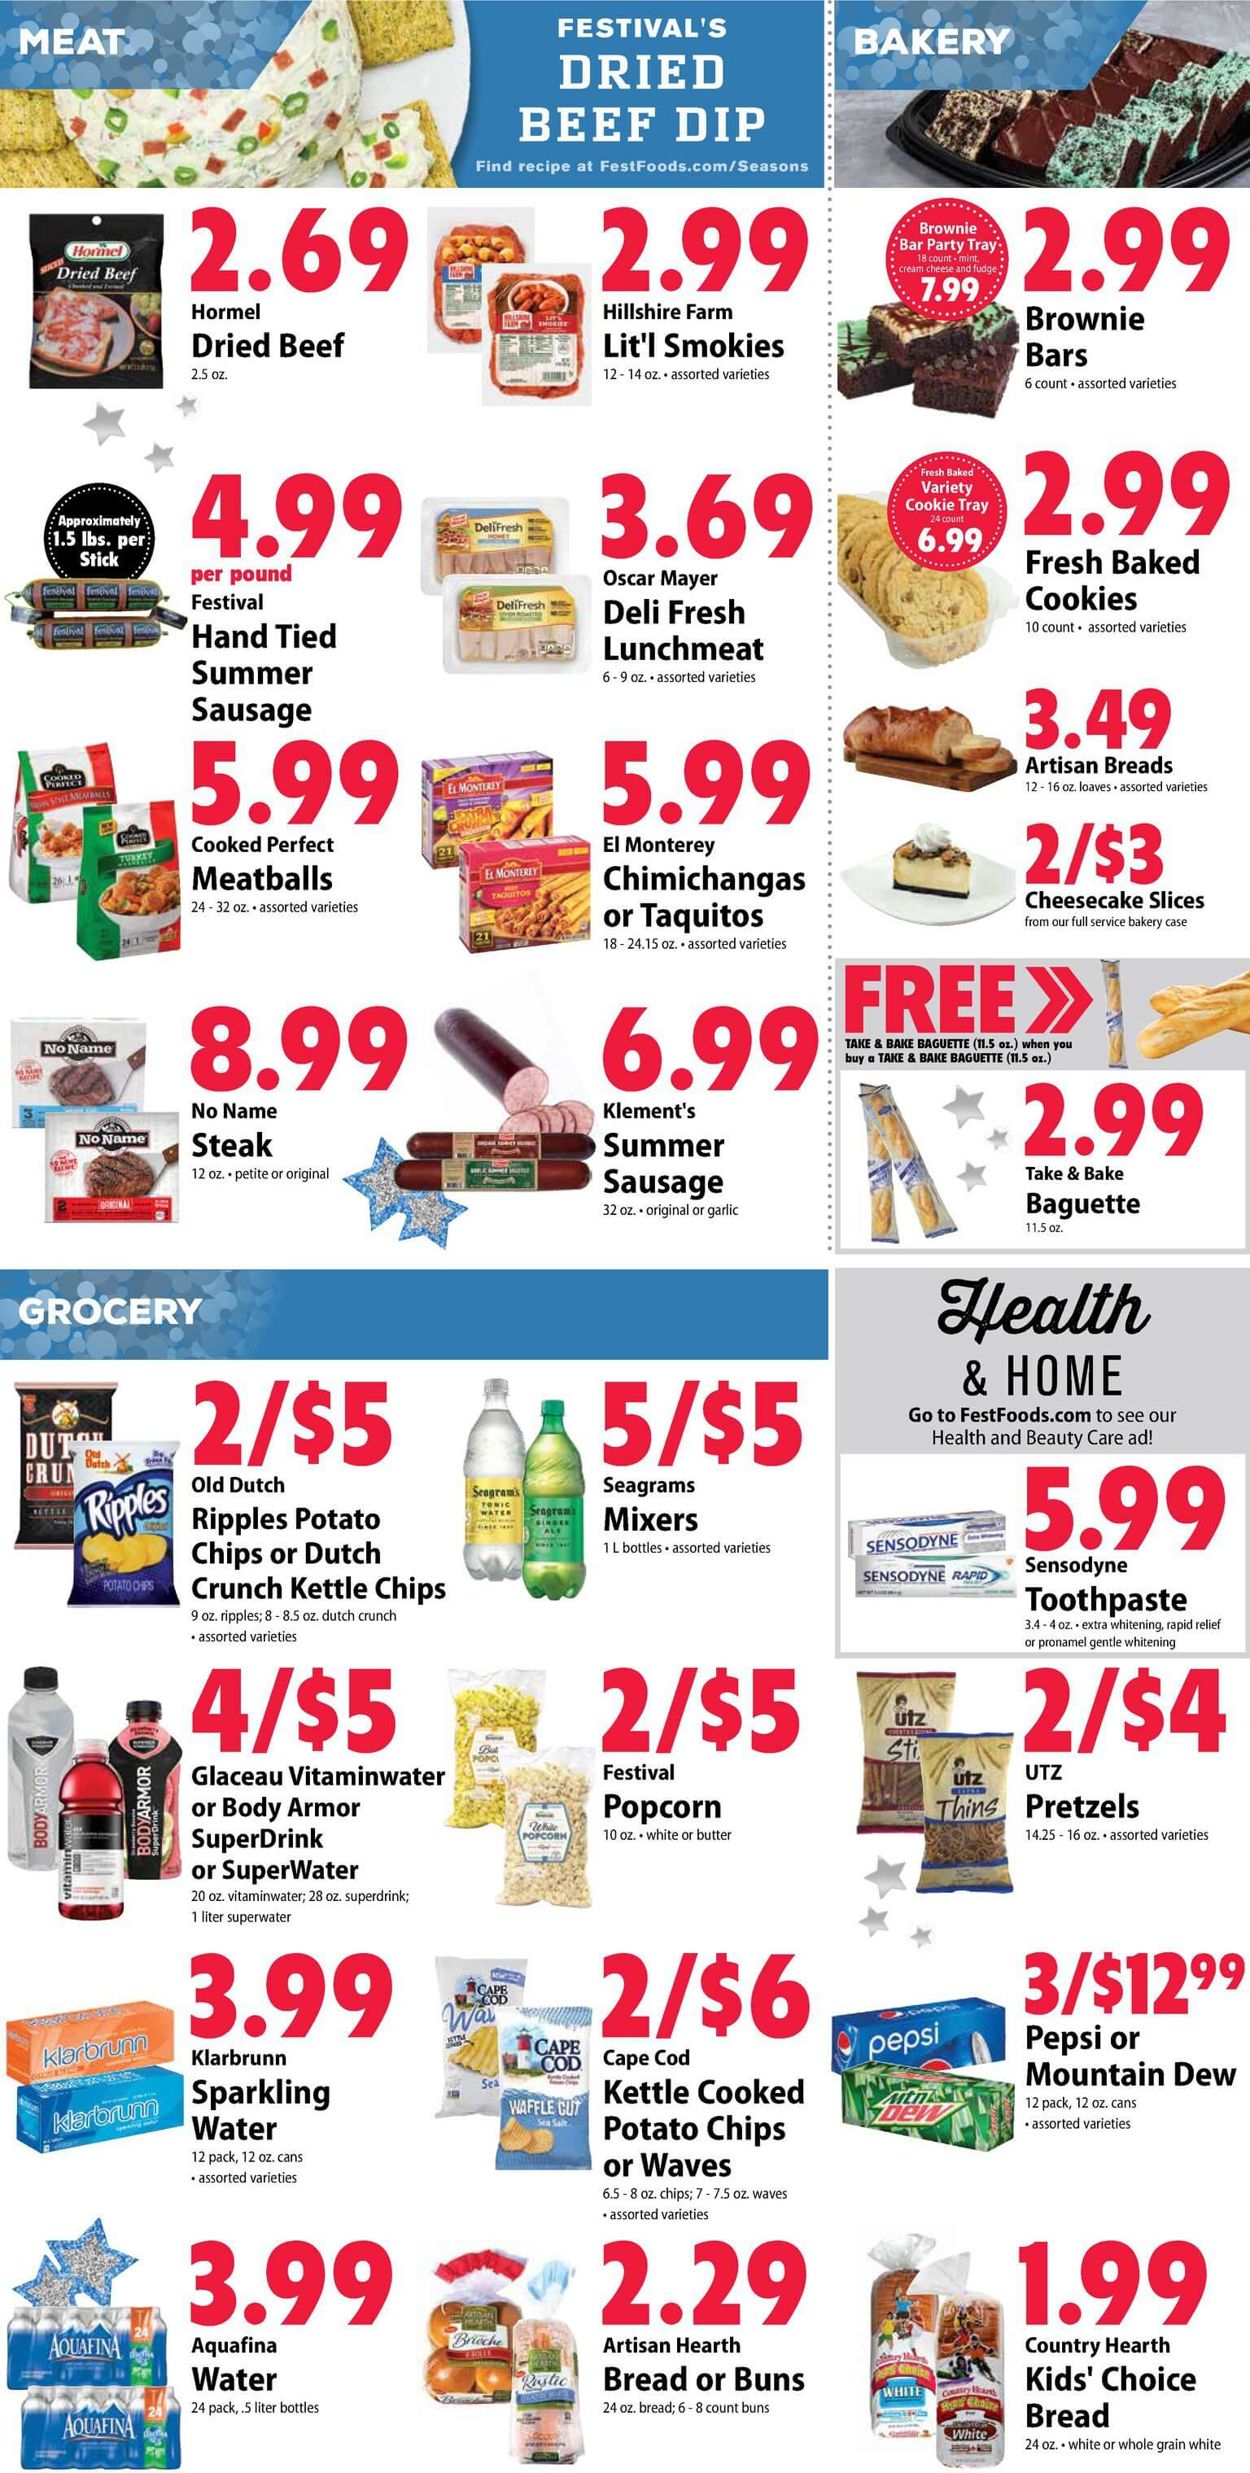 Festival Foods - New Year's Ad 2019/2020 Weekly Ad Circular - valid 12/25-12/31/2019 (Page 5)